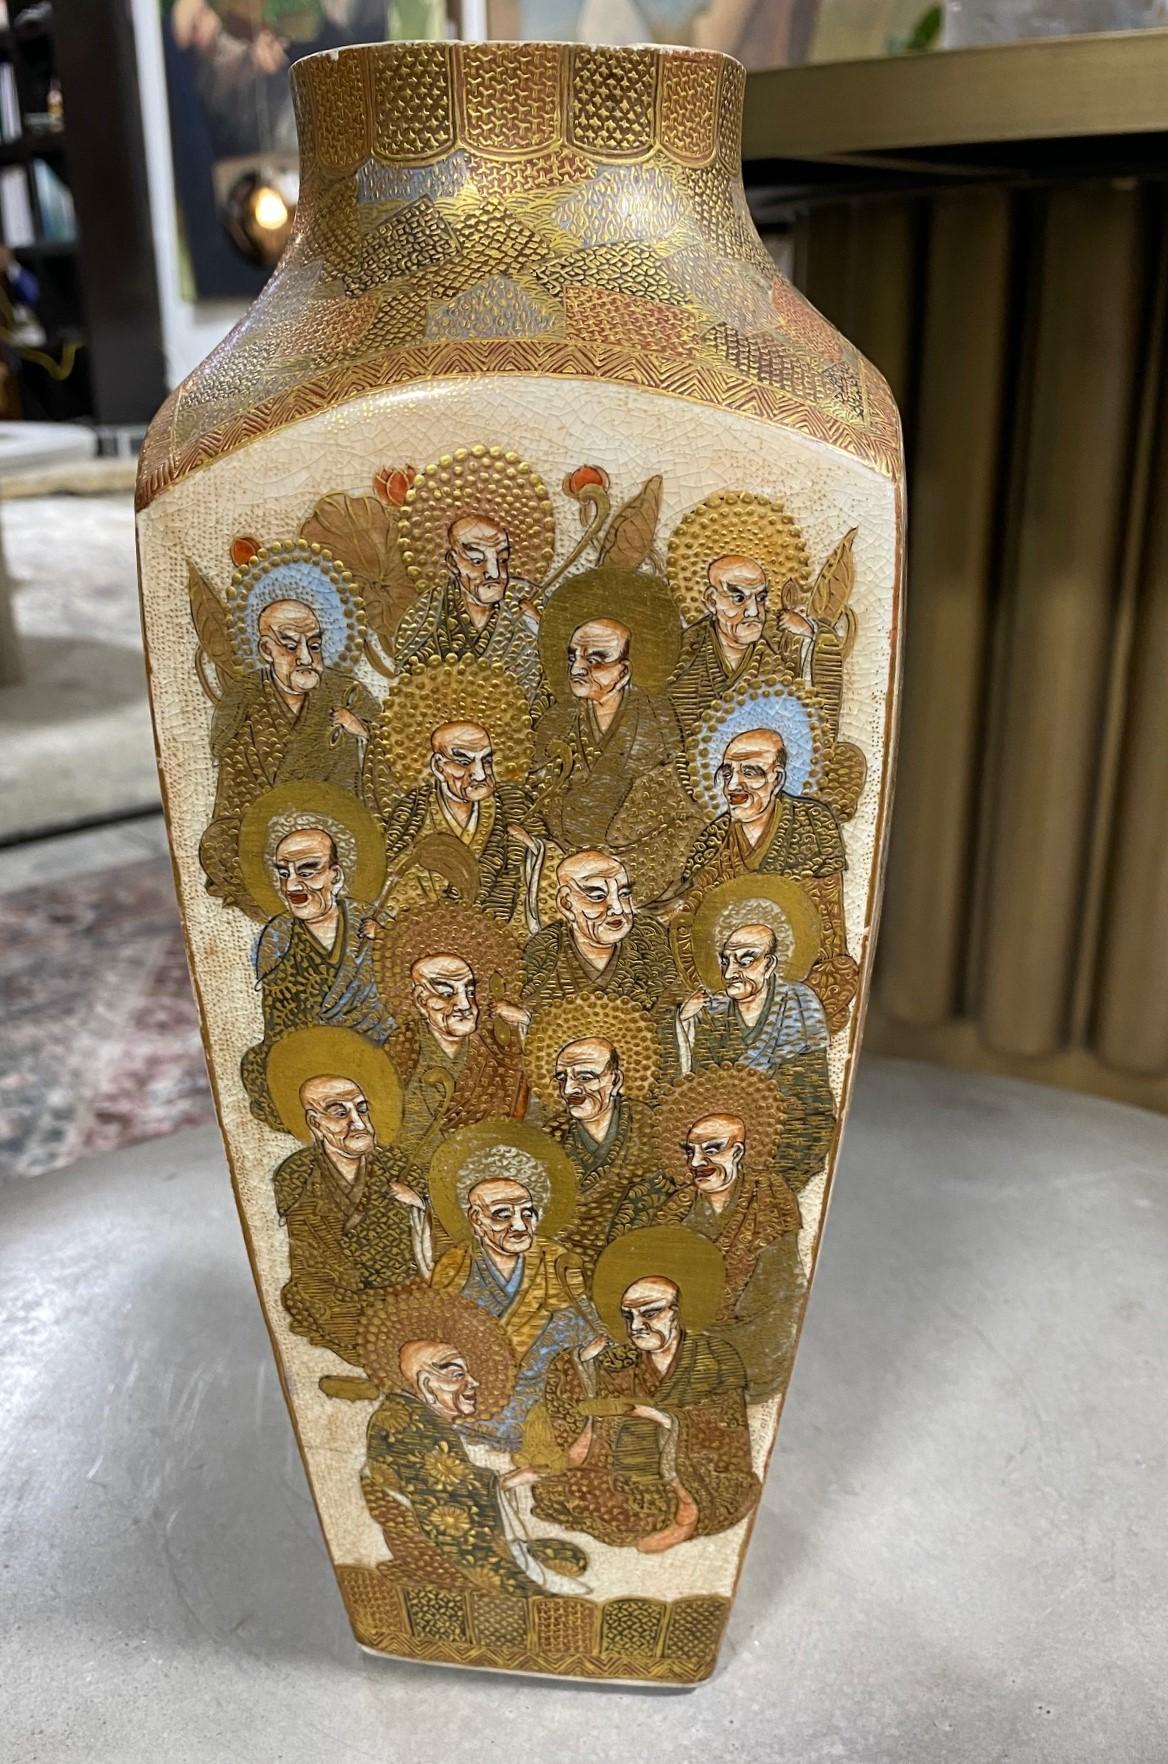 A beautiful Japanese Satsuma pottery studio vase featuring multiple kesa-clad enlightened Buddhist monks on each side of the vase. The piece is finely detailed with rich raised gilt highlights throughout and beautifully decorated in gold and various